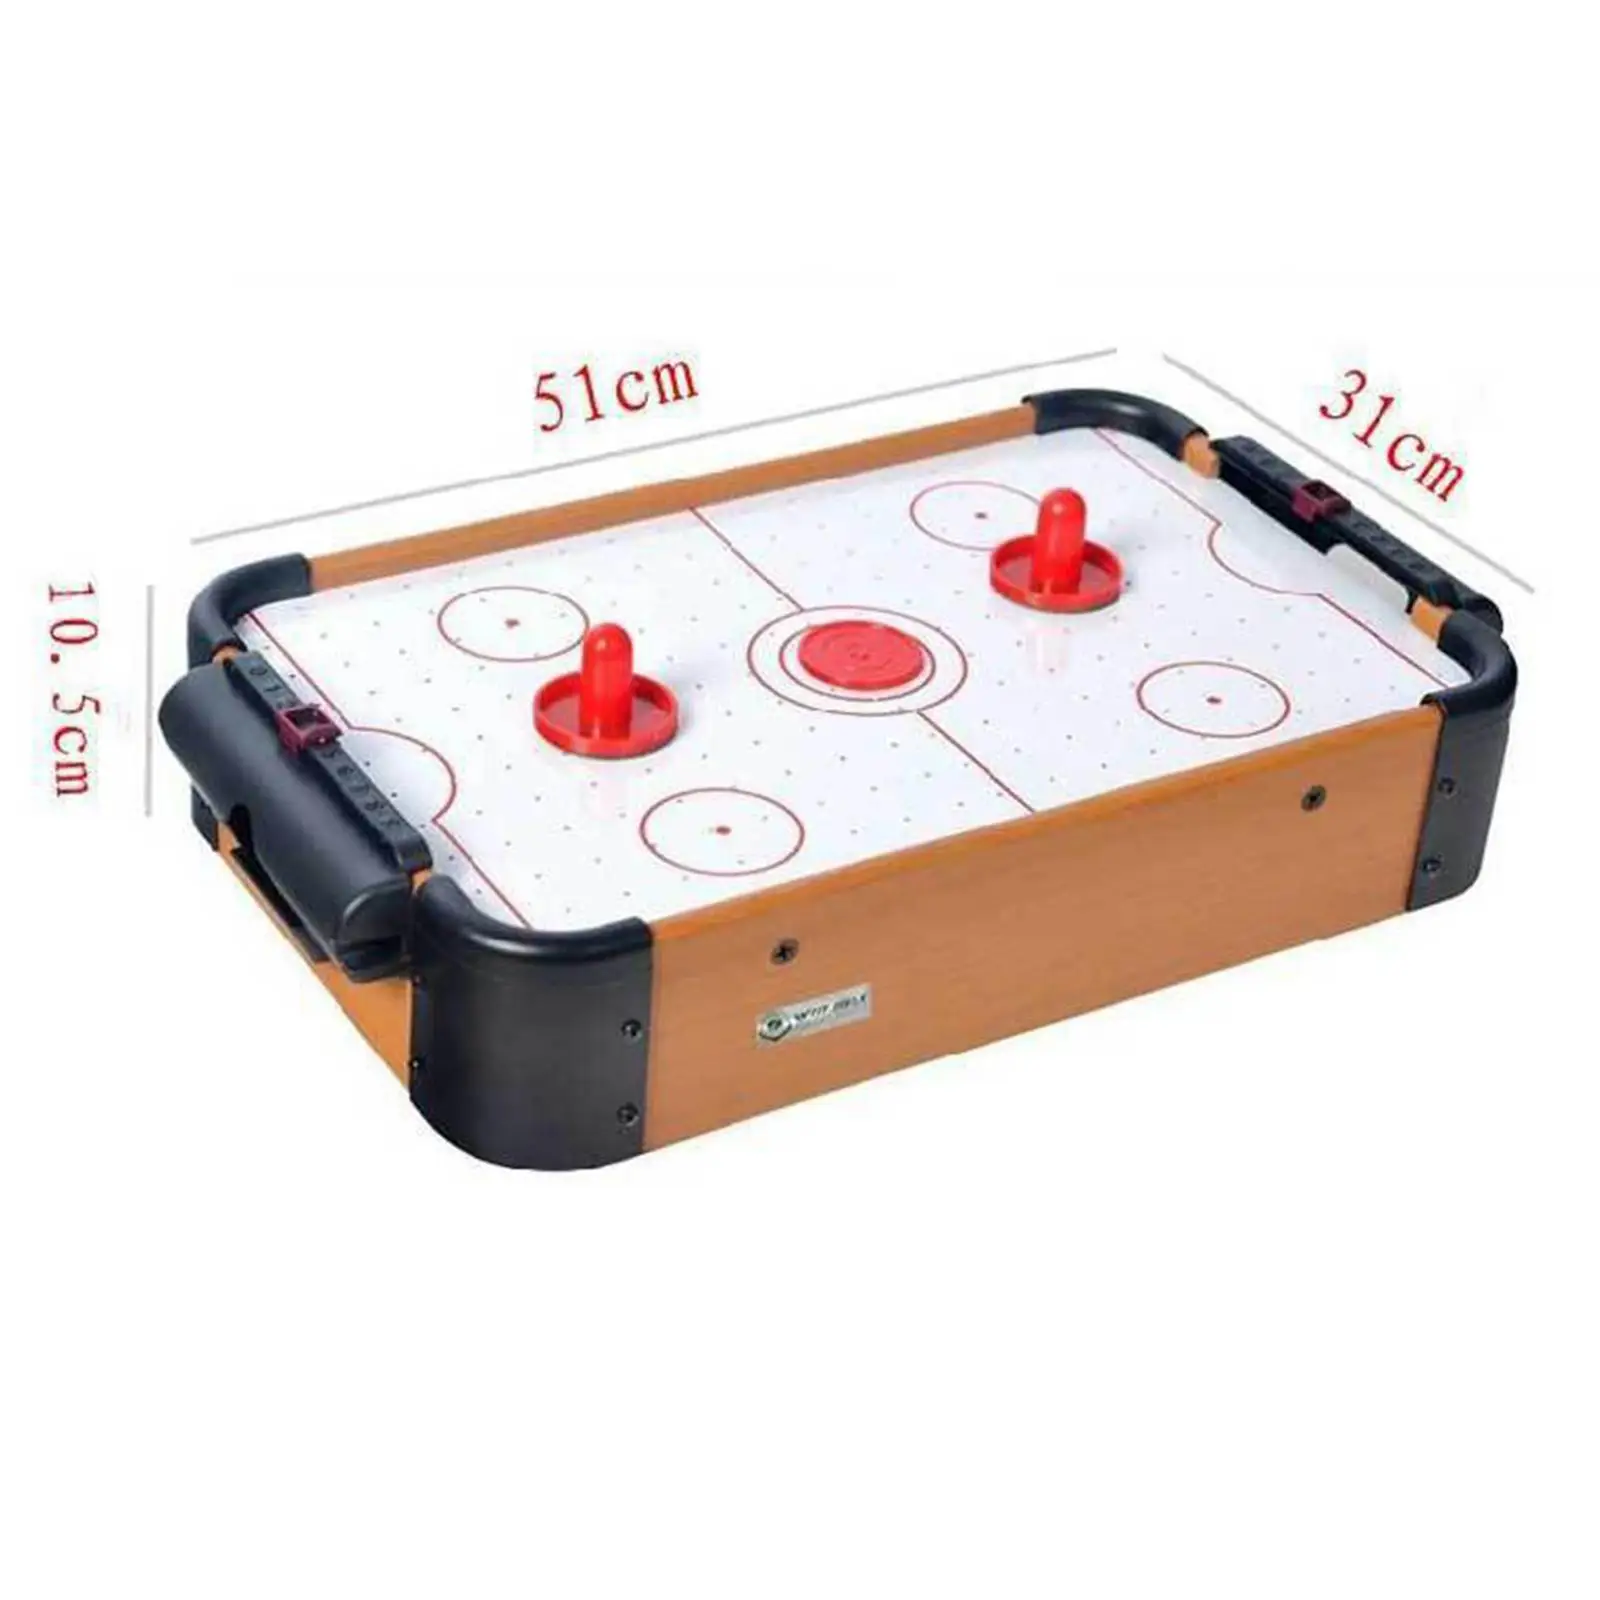 Cute Hockey games sport games party Football Board Educational Toys Foosball family plays Sports Tabletop Air Hockey for Child